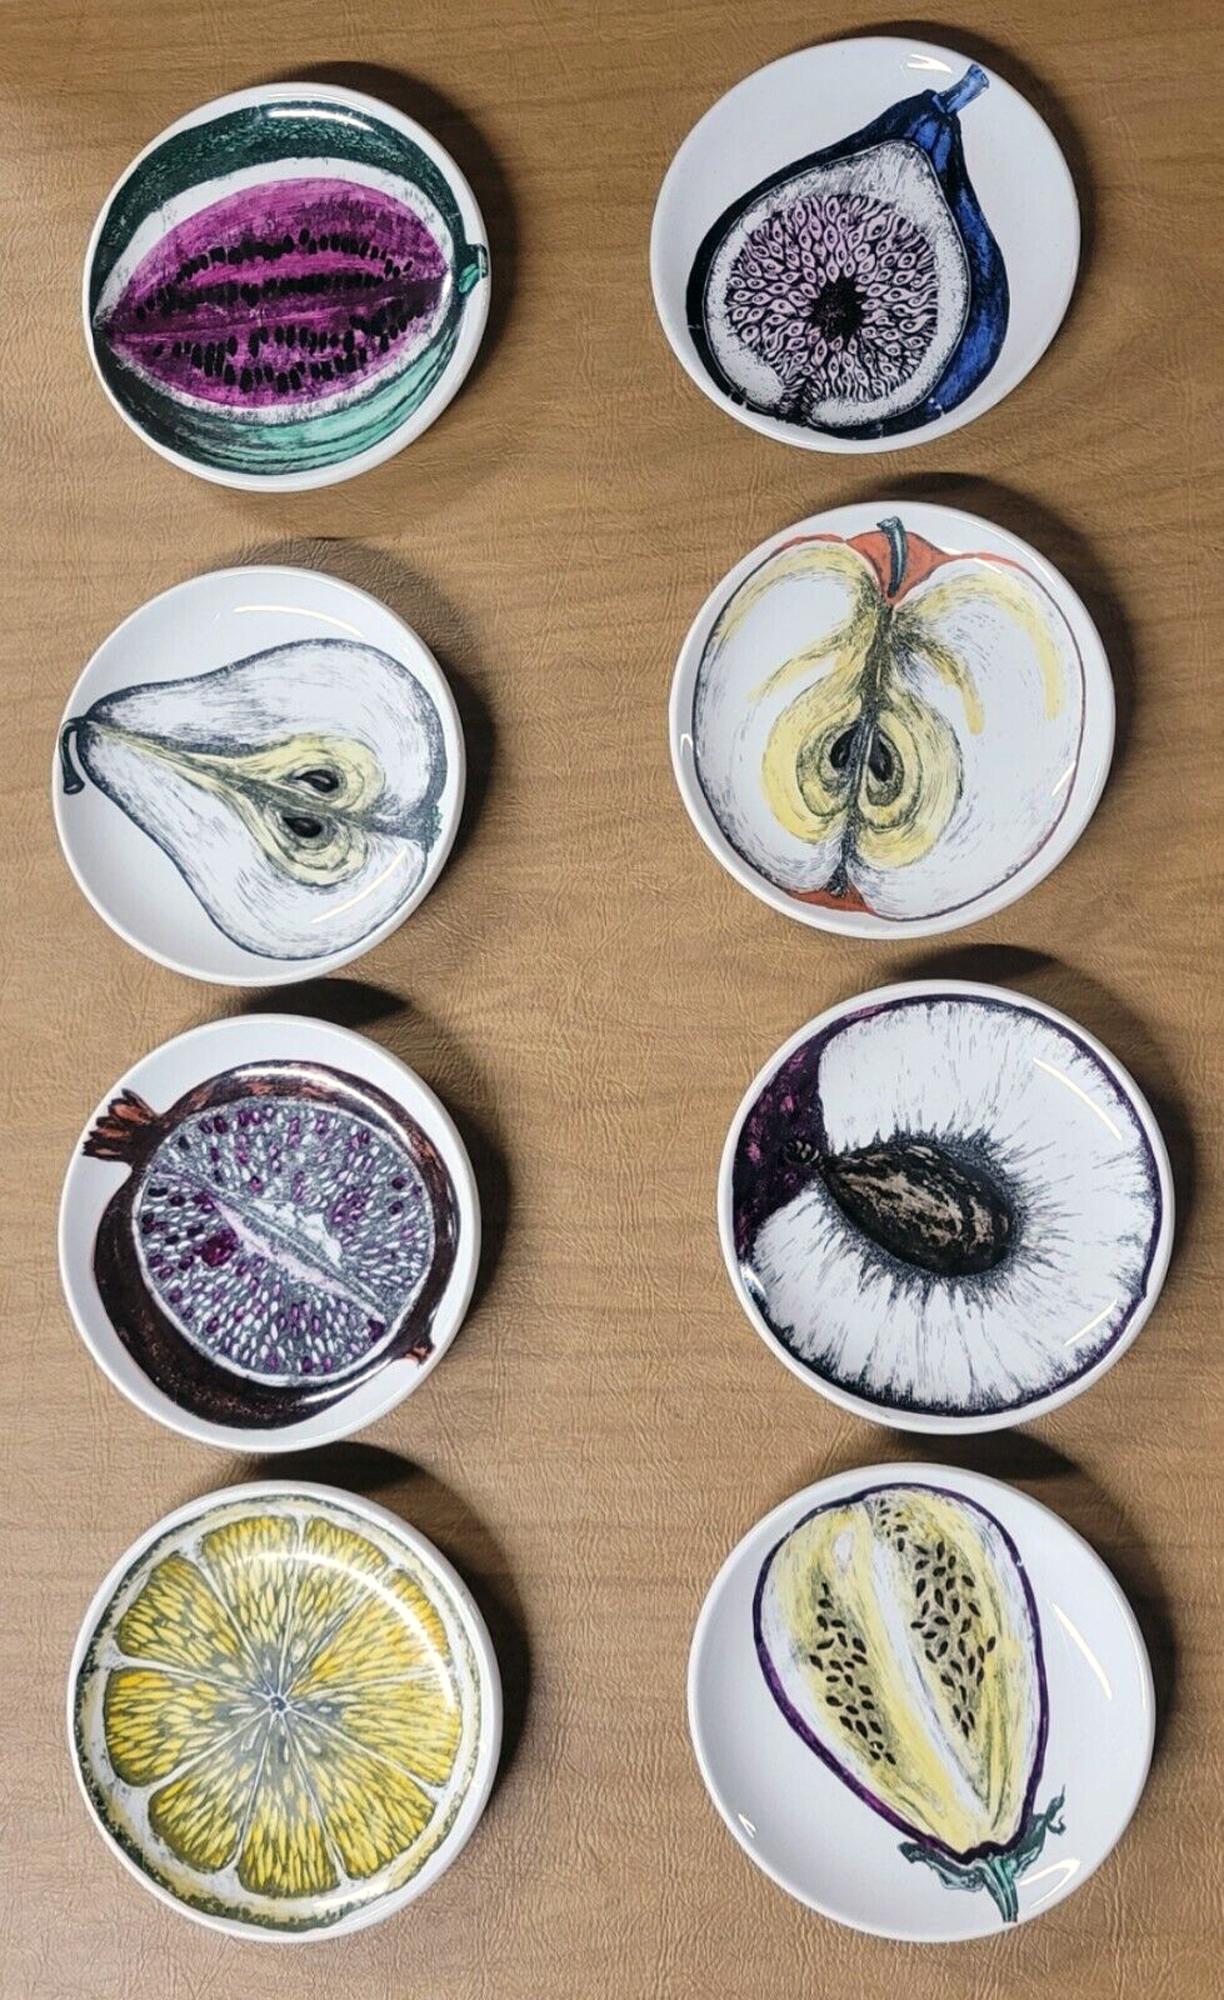 Piero Fornasetti set of eight Coasters Sezioni di Frutta Pattern,
With Original Gold Box,
Circa 1960s.

This is a fantastic and rare series with sections of different fruits depicted in rich color and detail. The most incredible